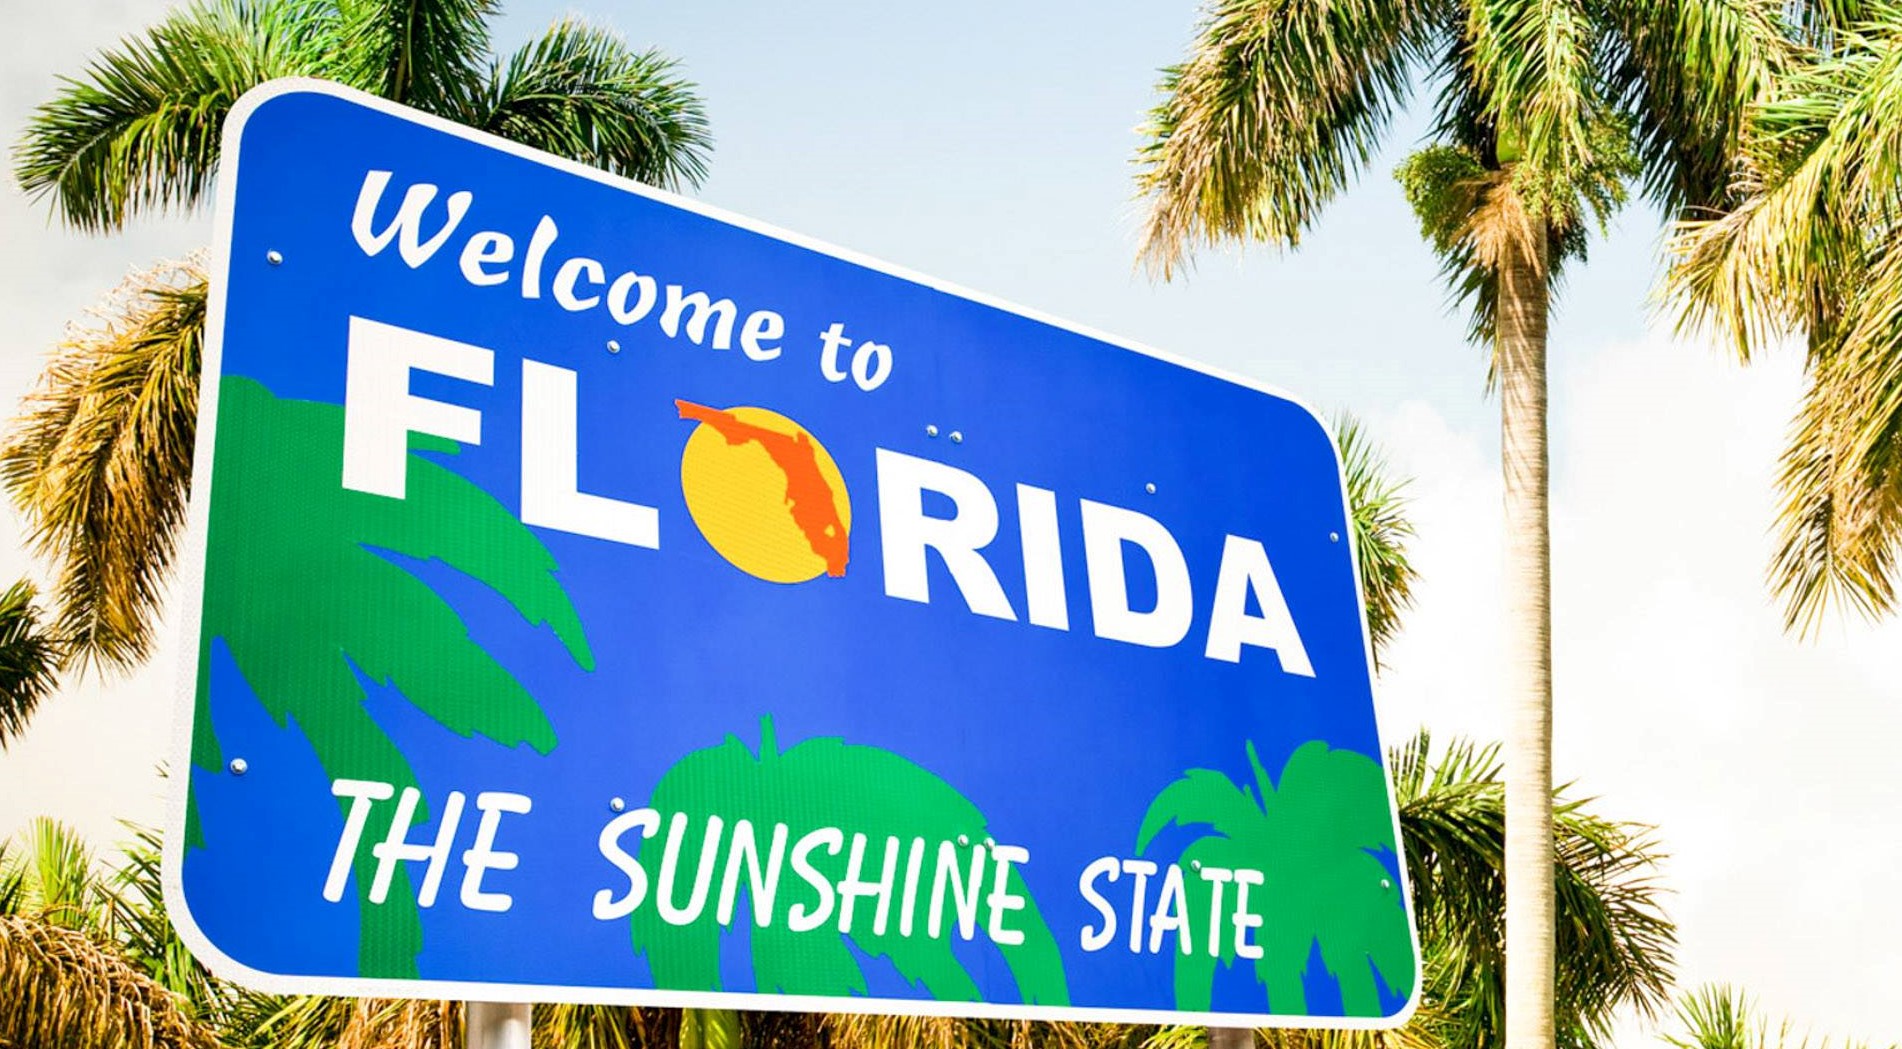 A beautiful Welcome to Florida - The Sunshine State sign in front of iconic palm trees